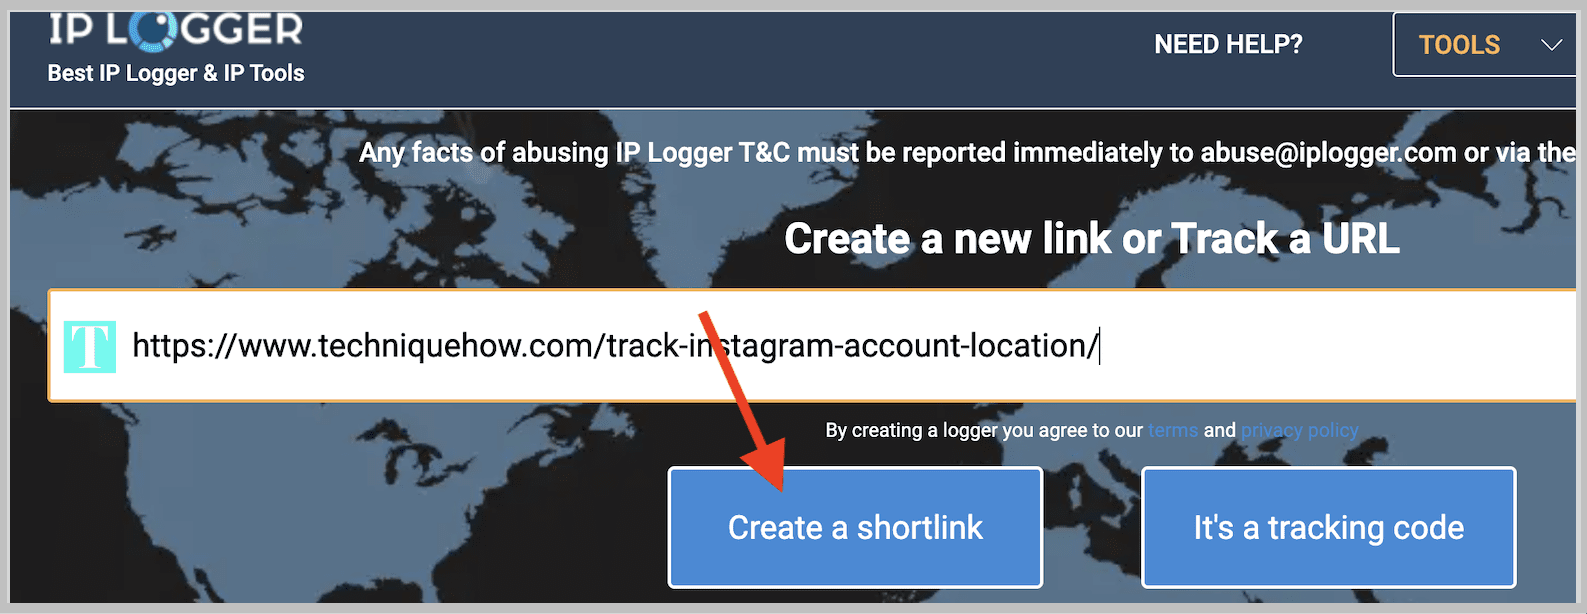 Click on create a shortlink